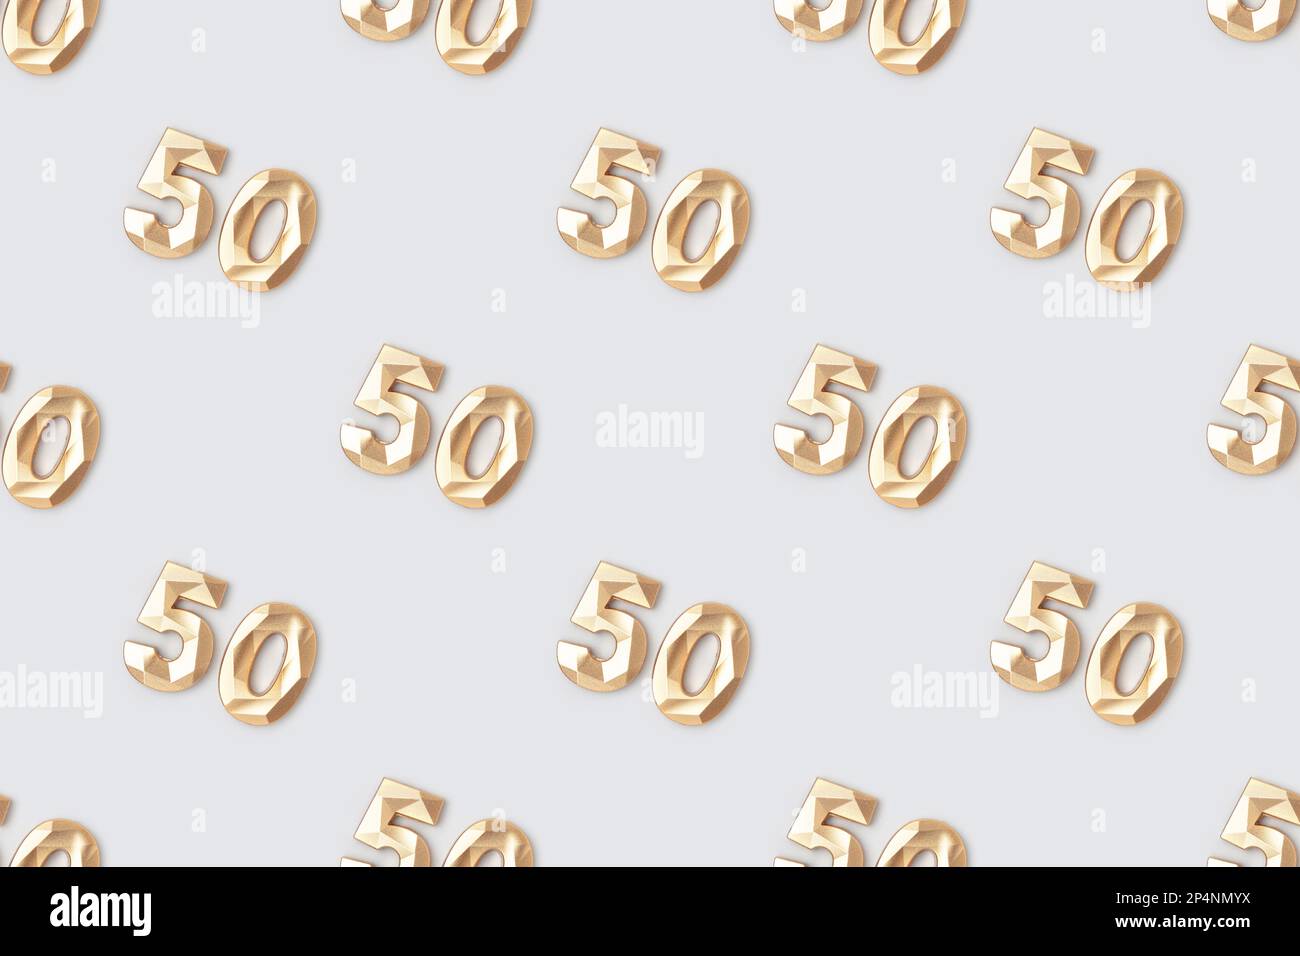 Pattern made of gold colored number fifty on a blue background. Stock Photo